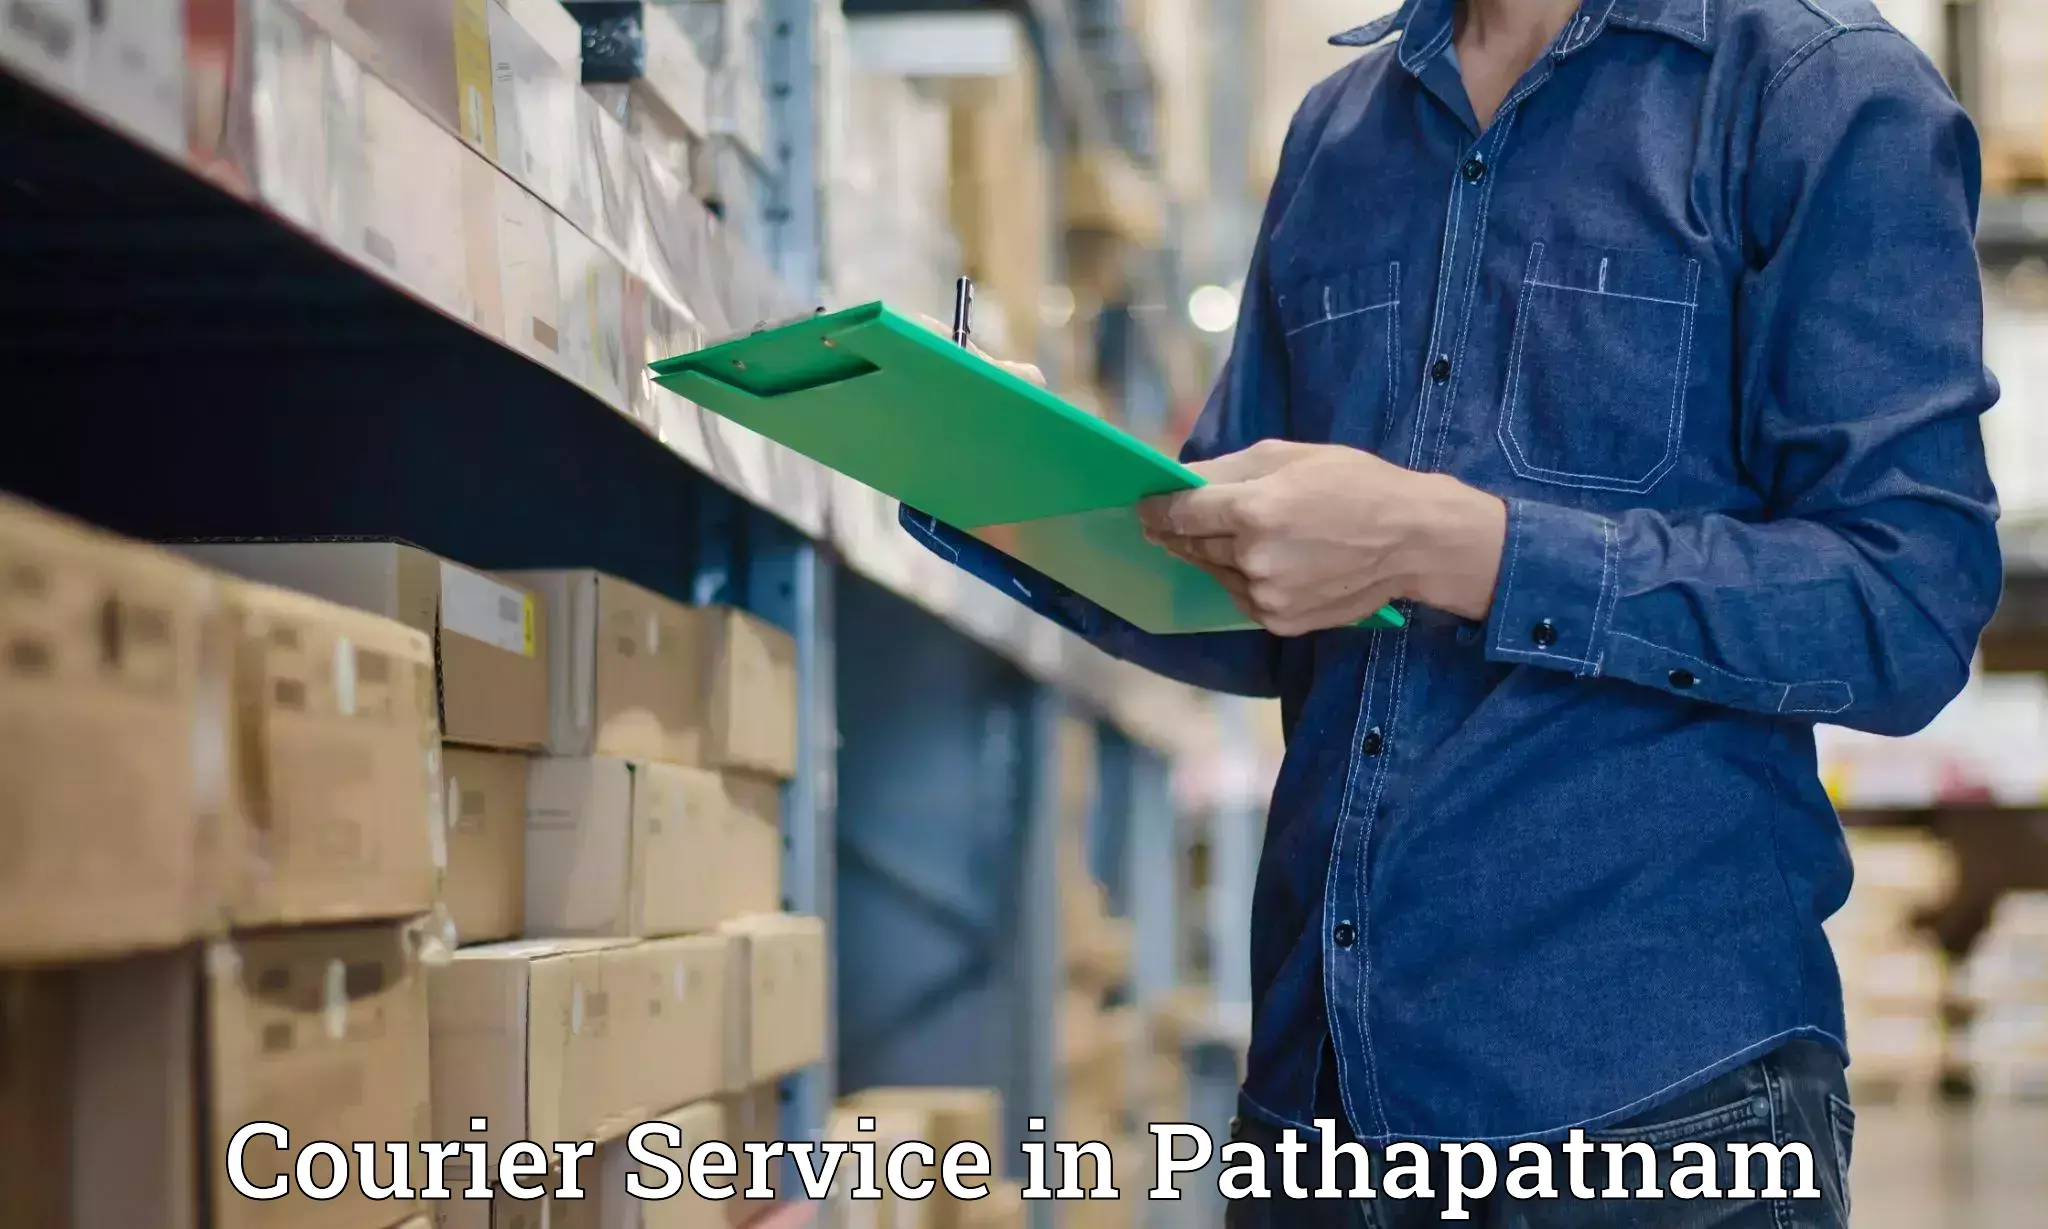 Nationwide courier service in Pathapatnam